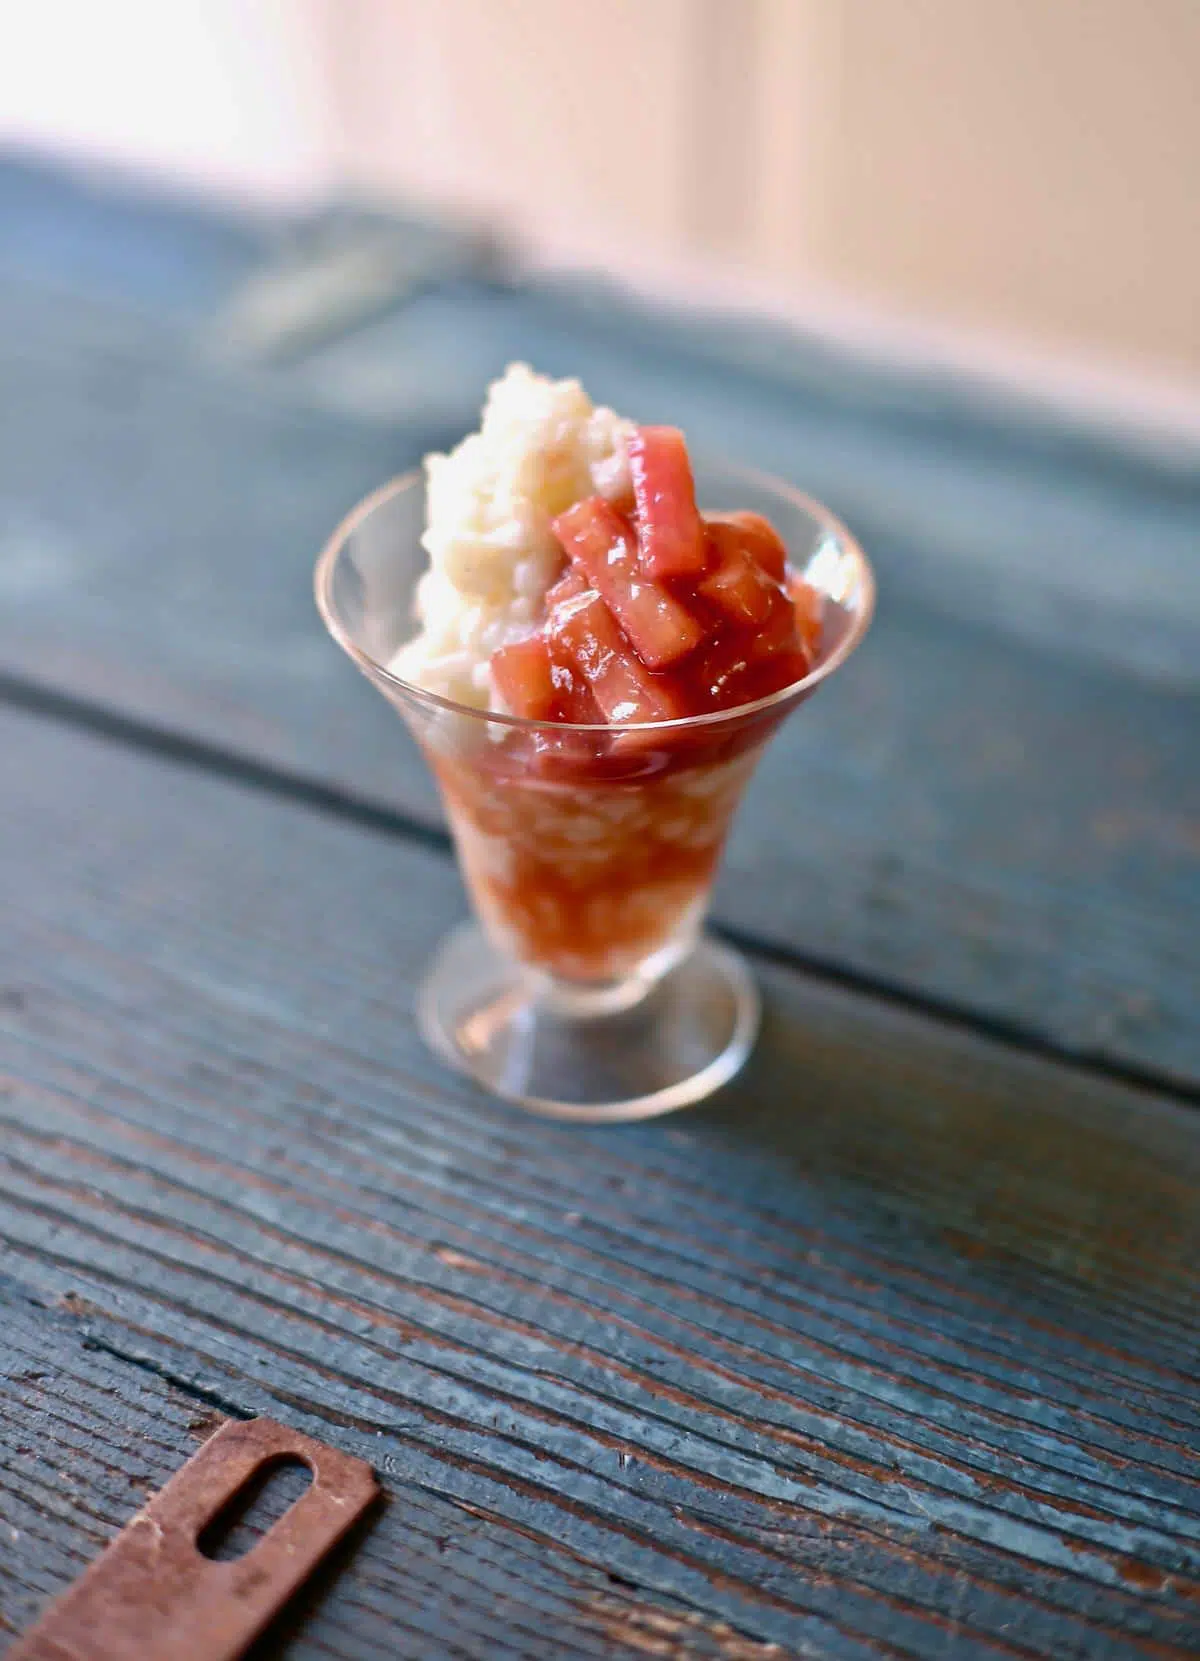 rice pudding with rhubarb in a small glass on a blue table